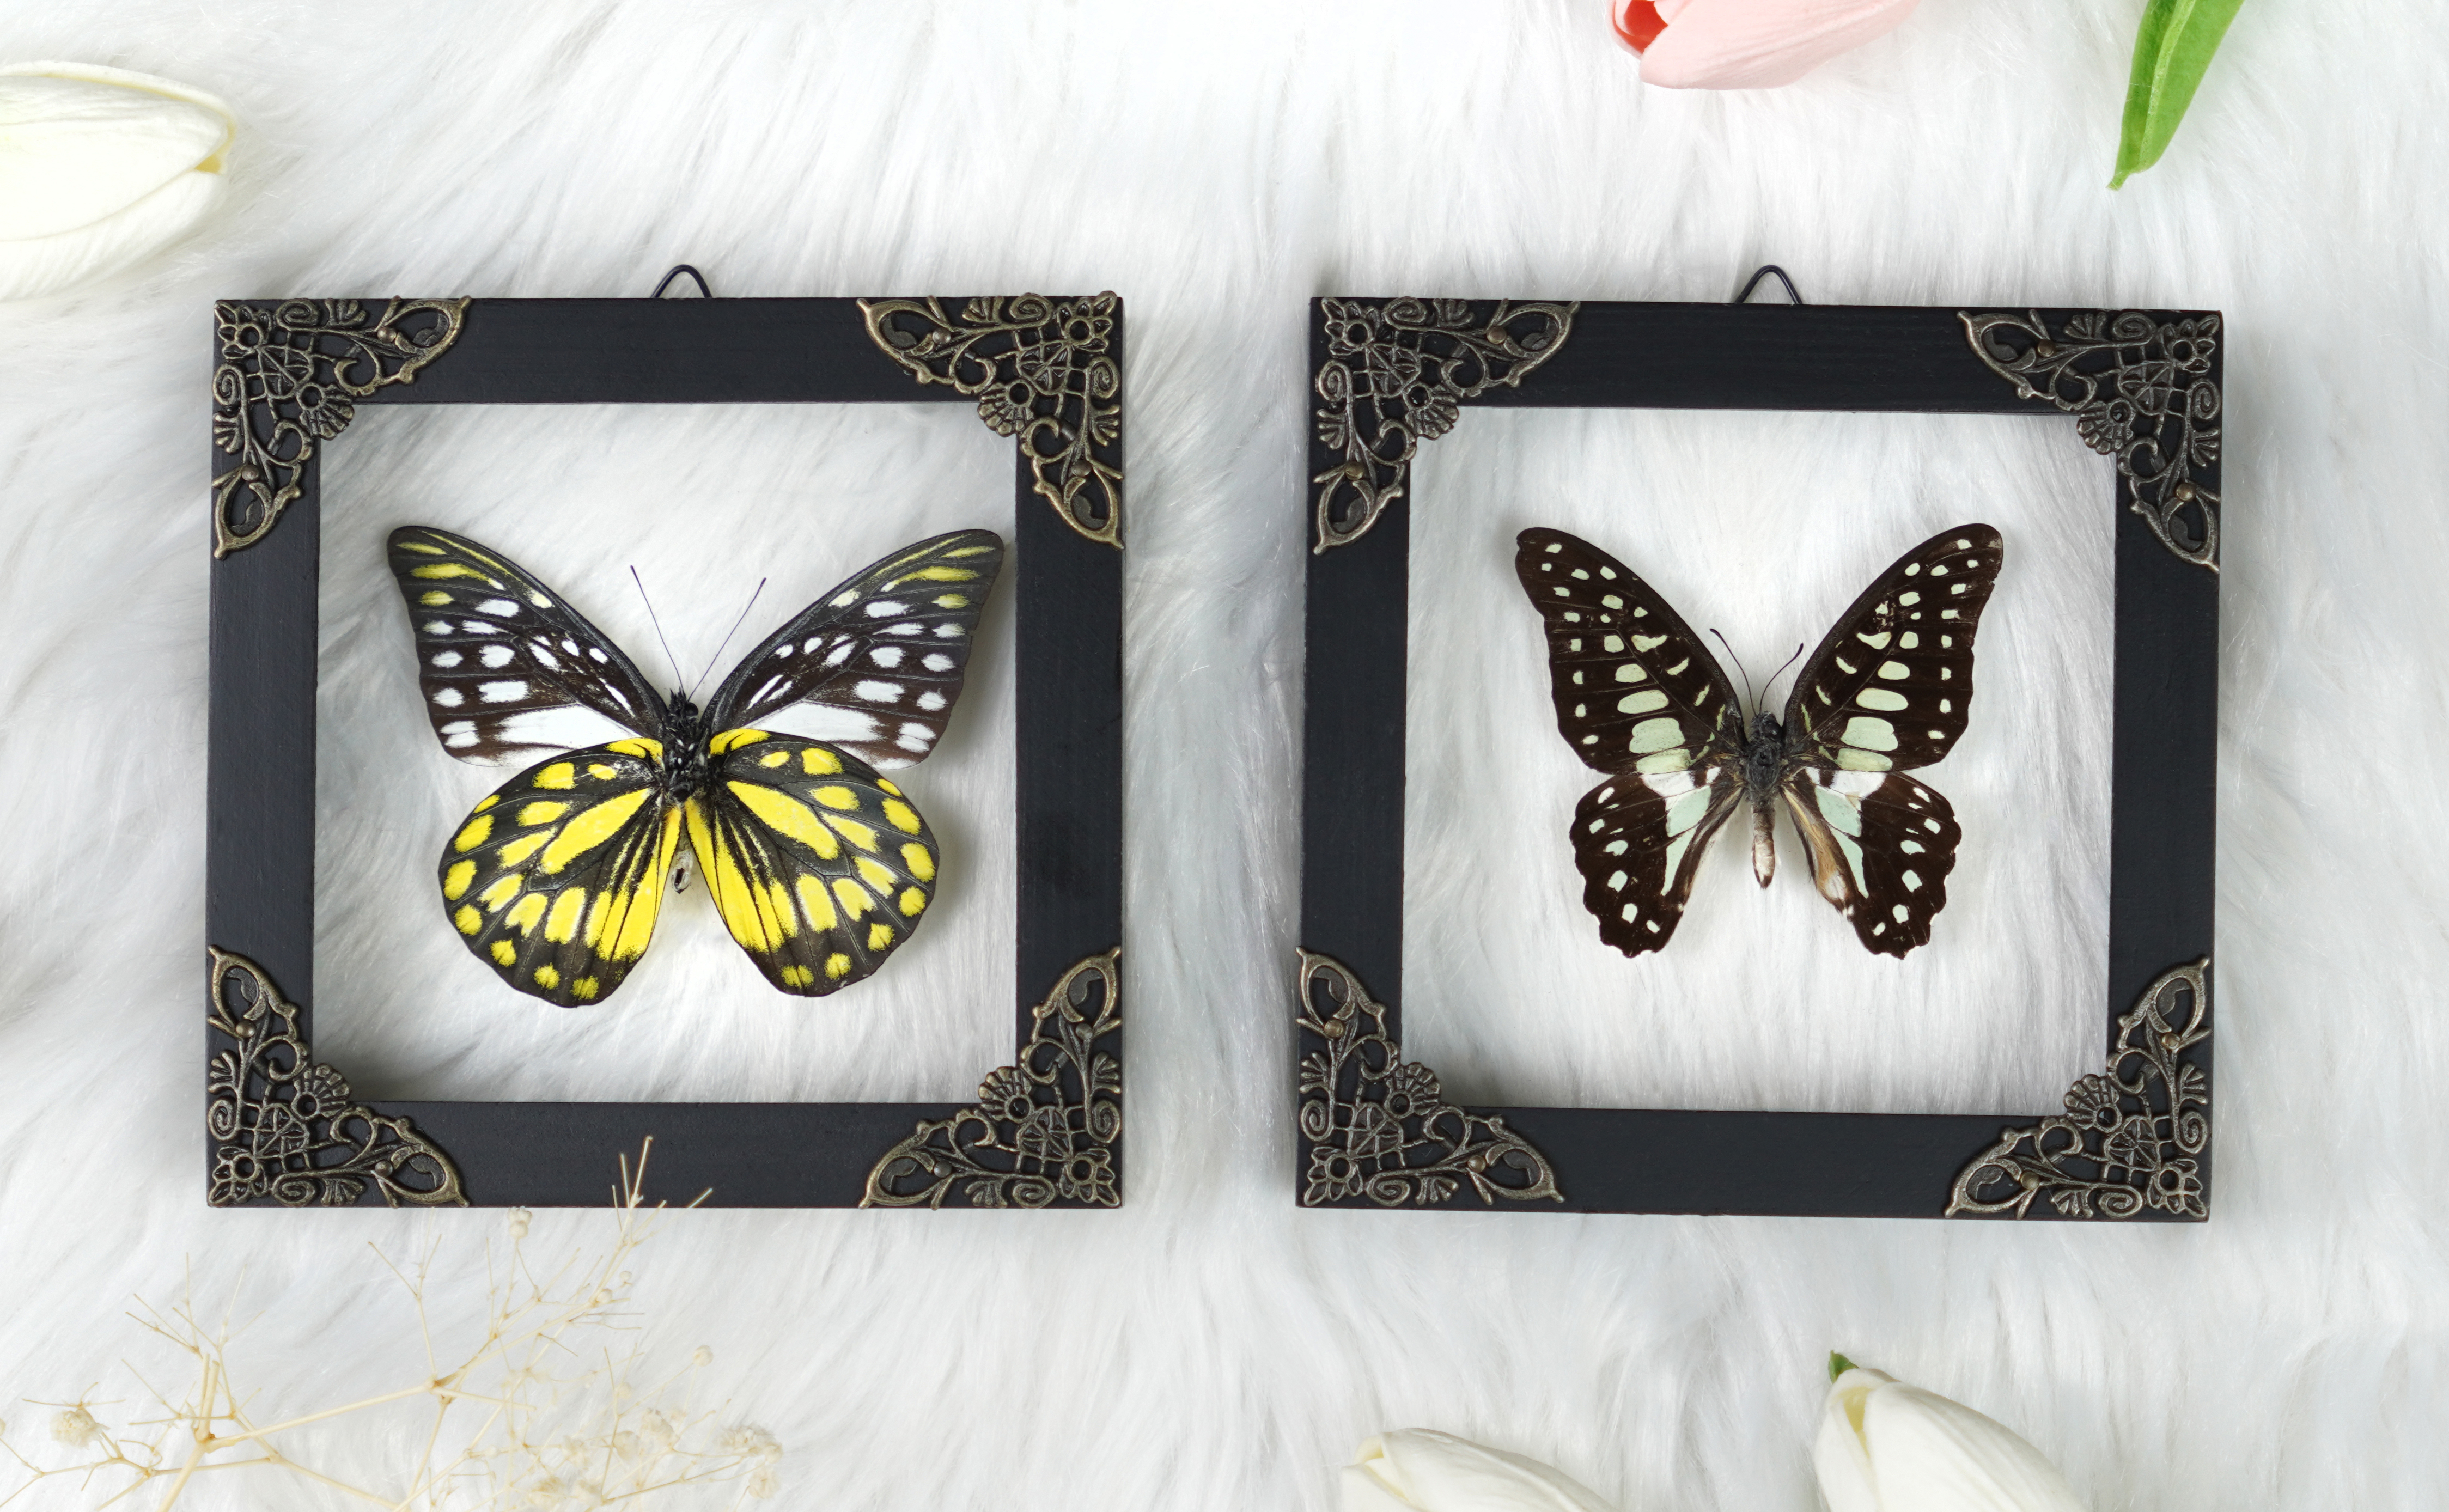 Taxidermy Butterfies Framed Shelf Gothic Decor - Dried Insect Spooky Floating Wall Decor K12-10KINH11KINH